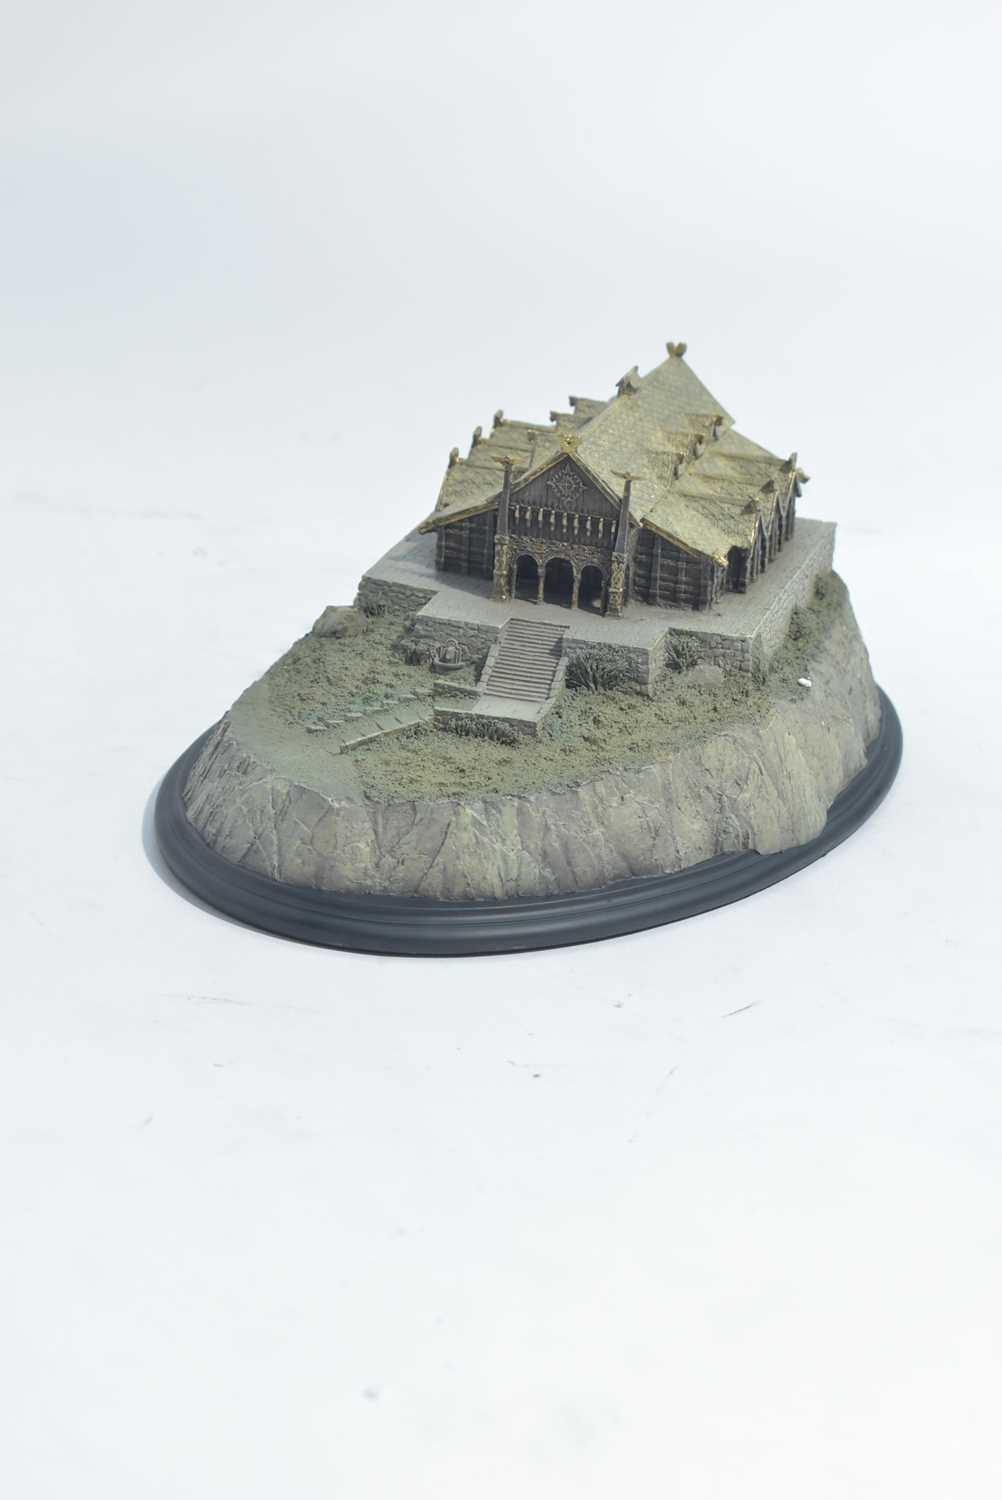 Lot 260 - Sideshow Weta Collectibles: The Lord of the Rings, Golden Hall polystone enviroment